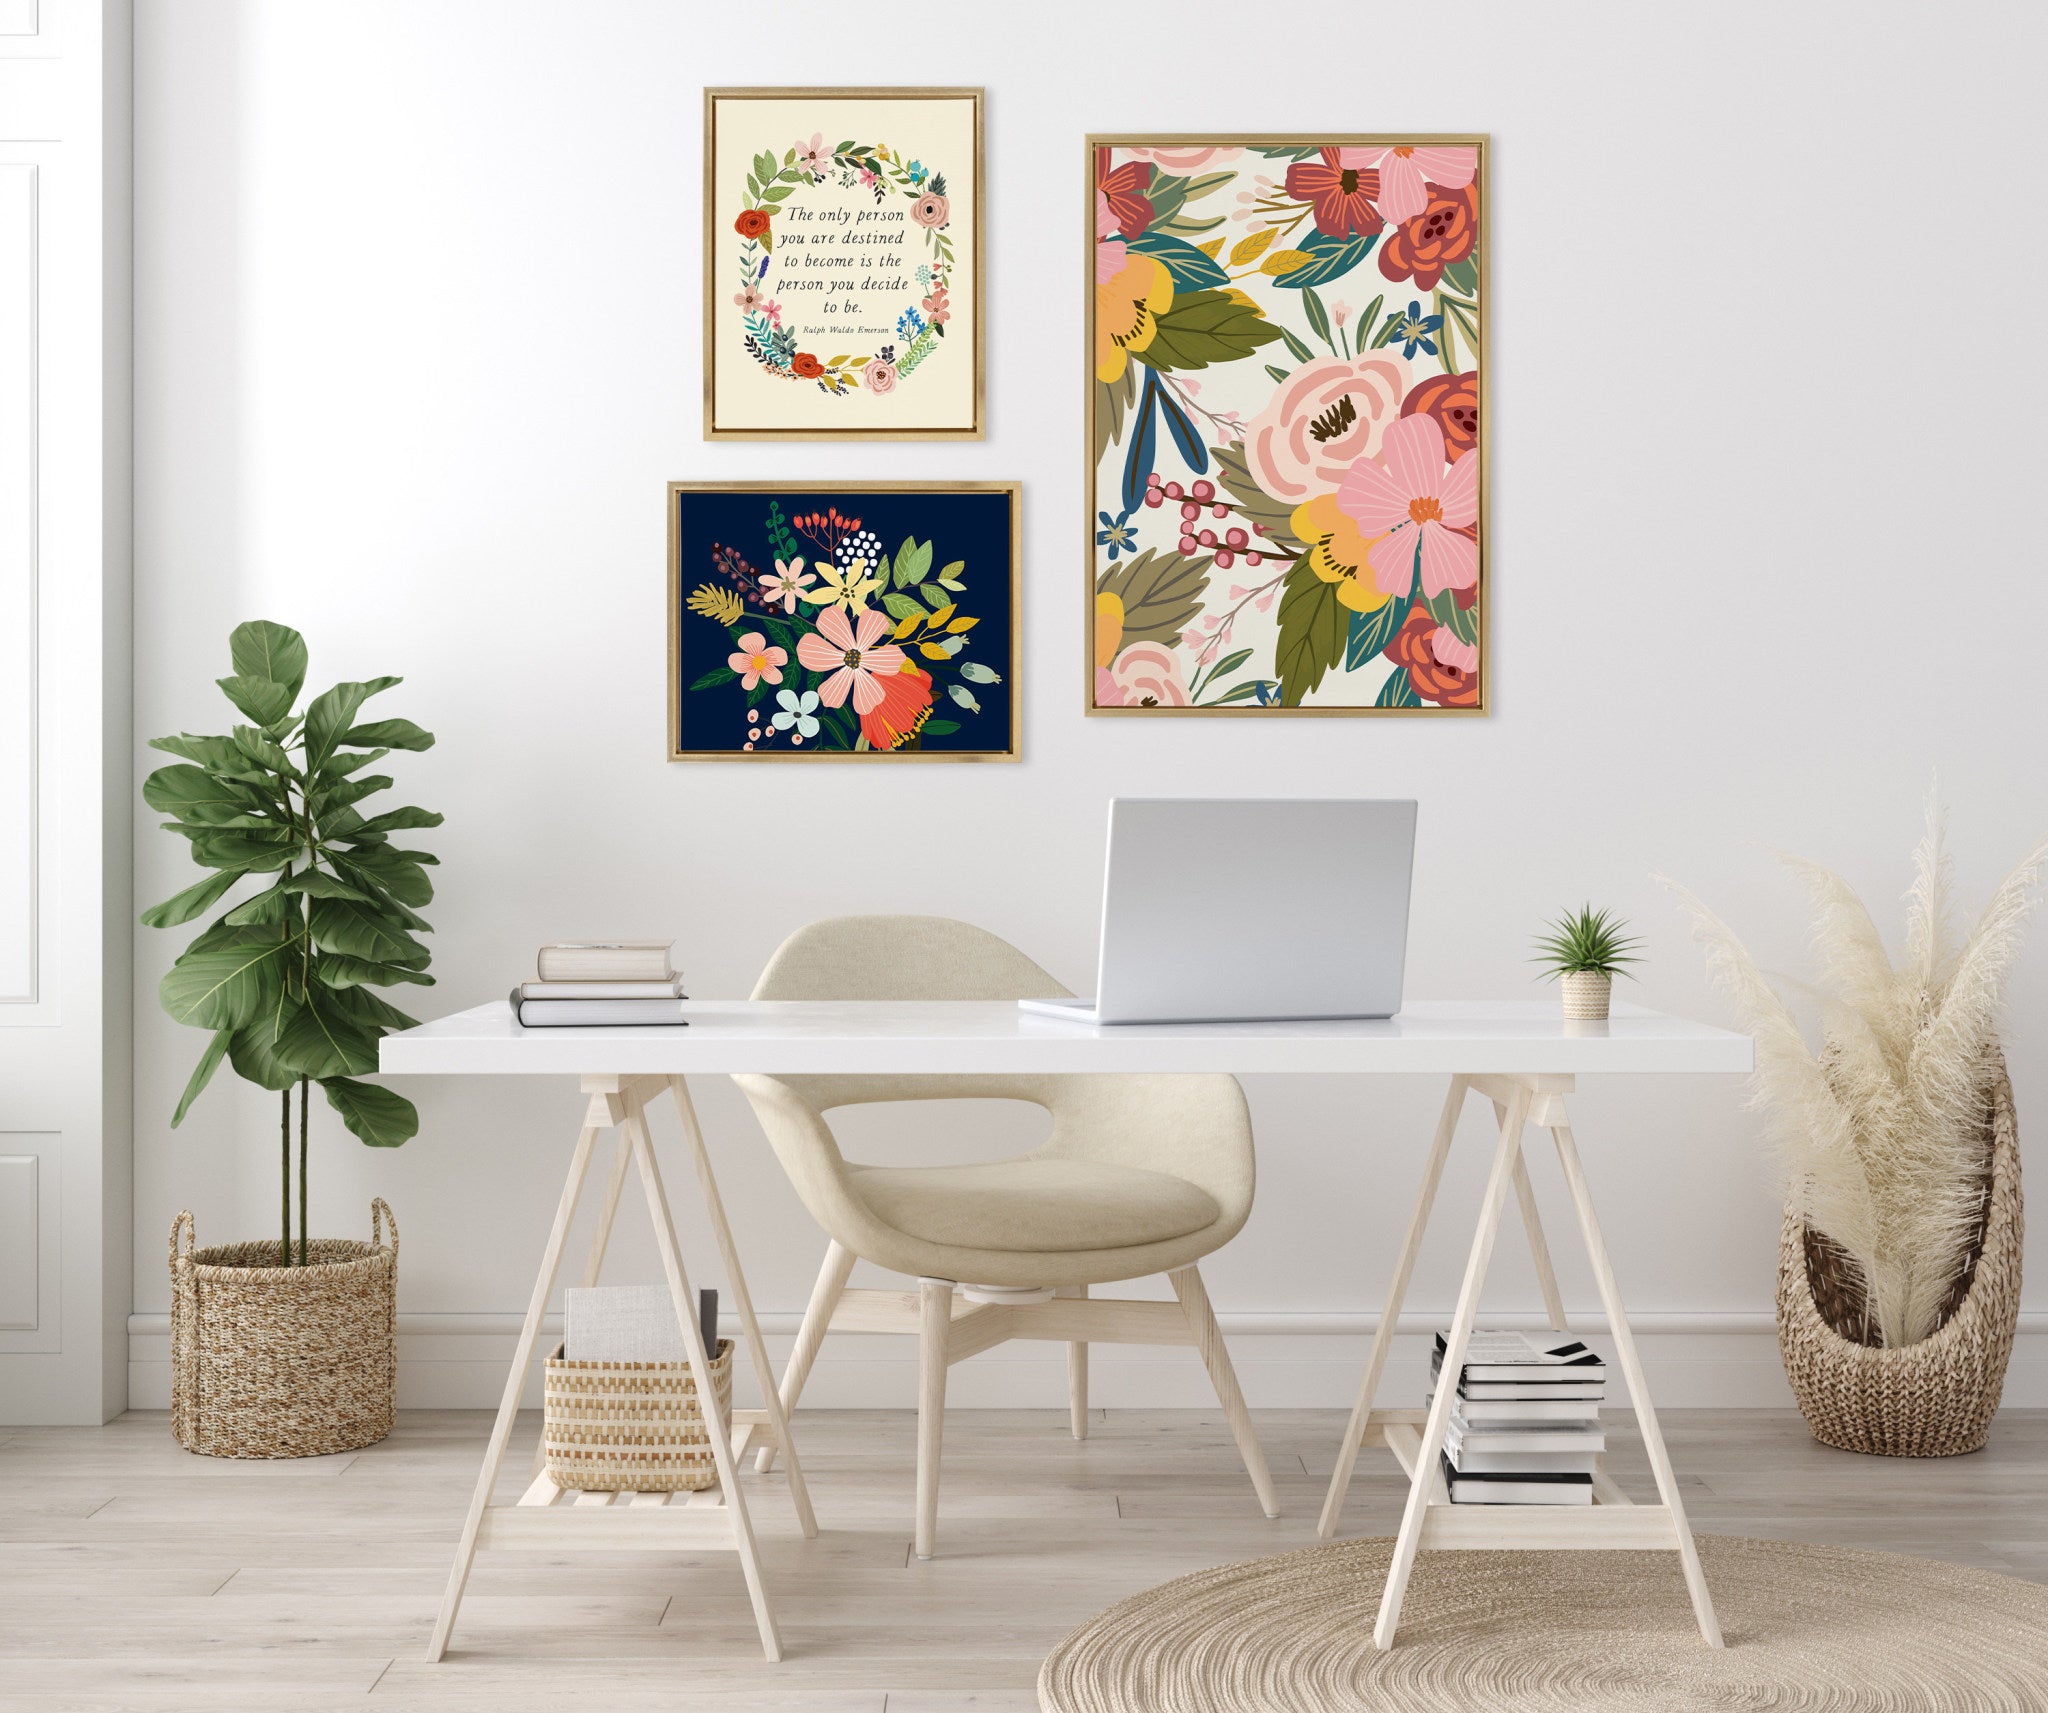 Sylvie Softly, MC 481 Floralis C and MC441 The Only Person Framed Canvas Art Set by Mia Charro